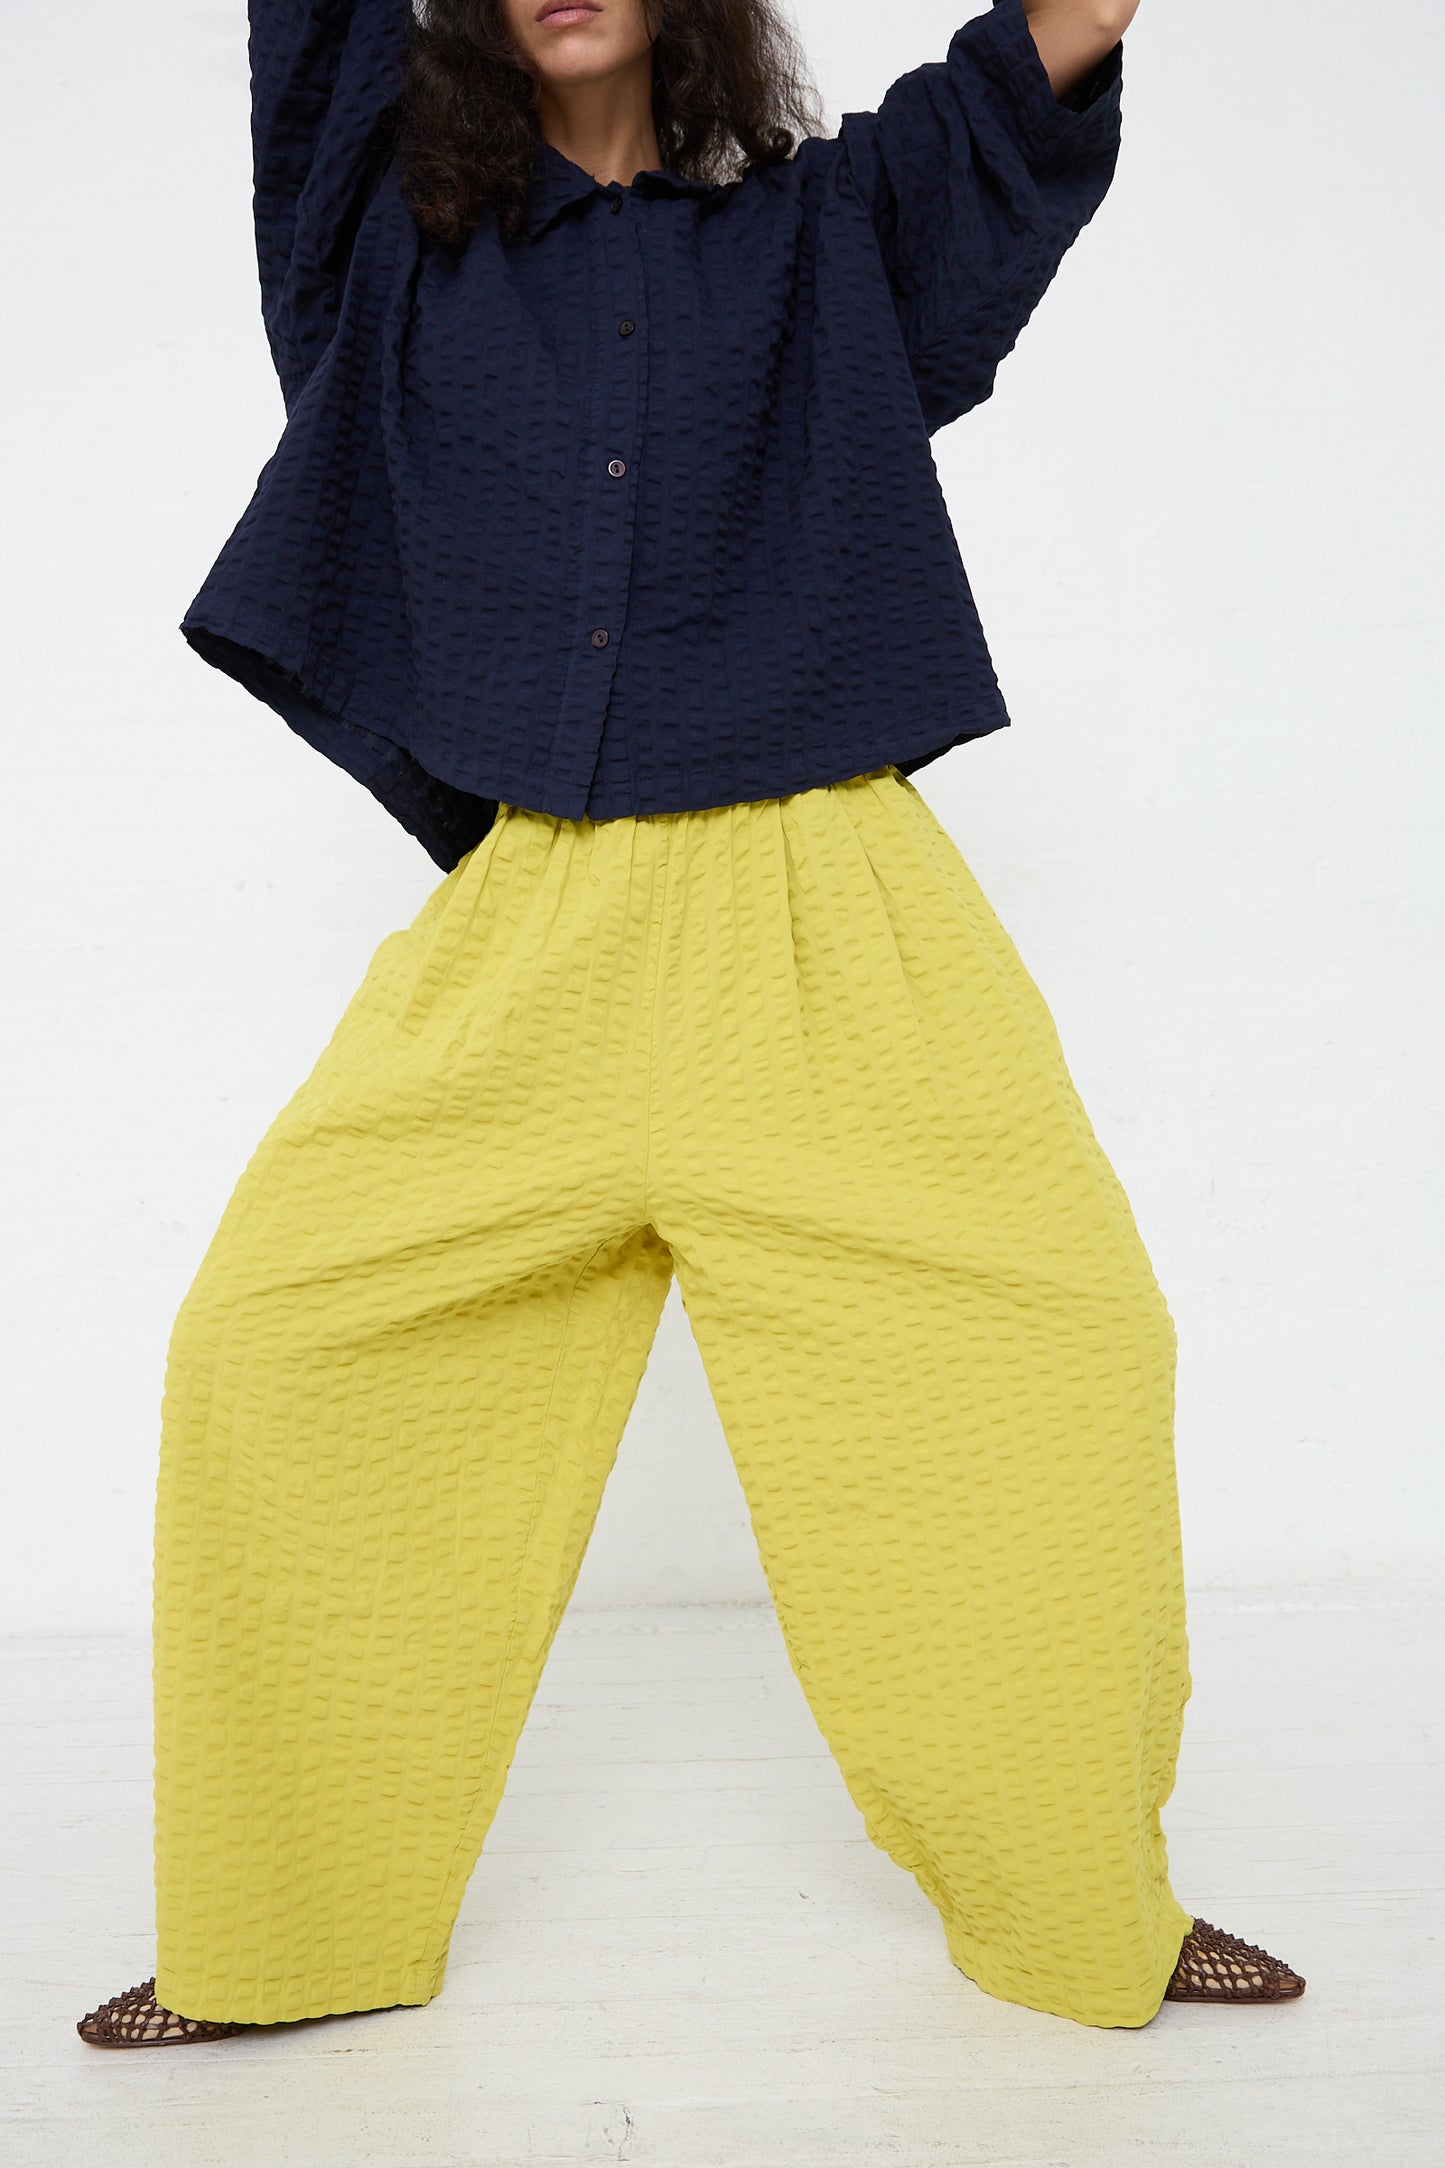 A person stands against a white background wearing a navy blue blouse with voluminous sleeves and high-waisted Yellow Cotton Seersucker Wide Pant in Turmeric trousers by Black Crane, with brown flat shoes visible.